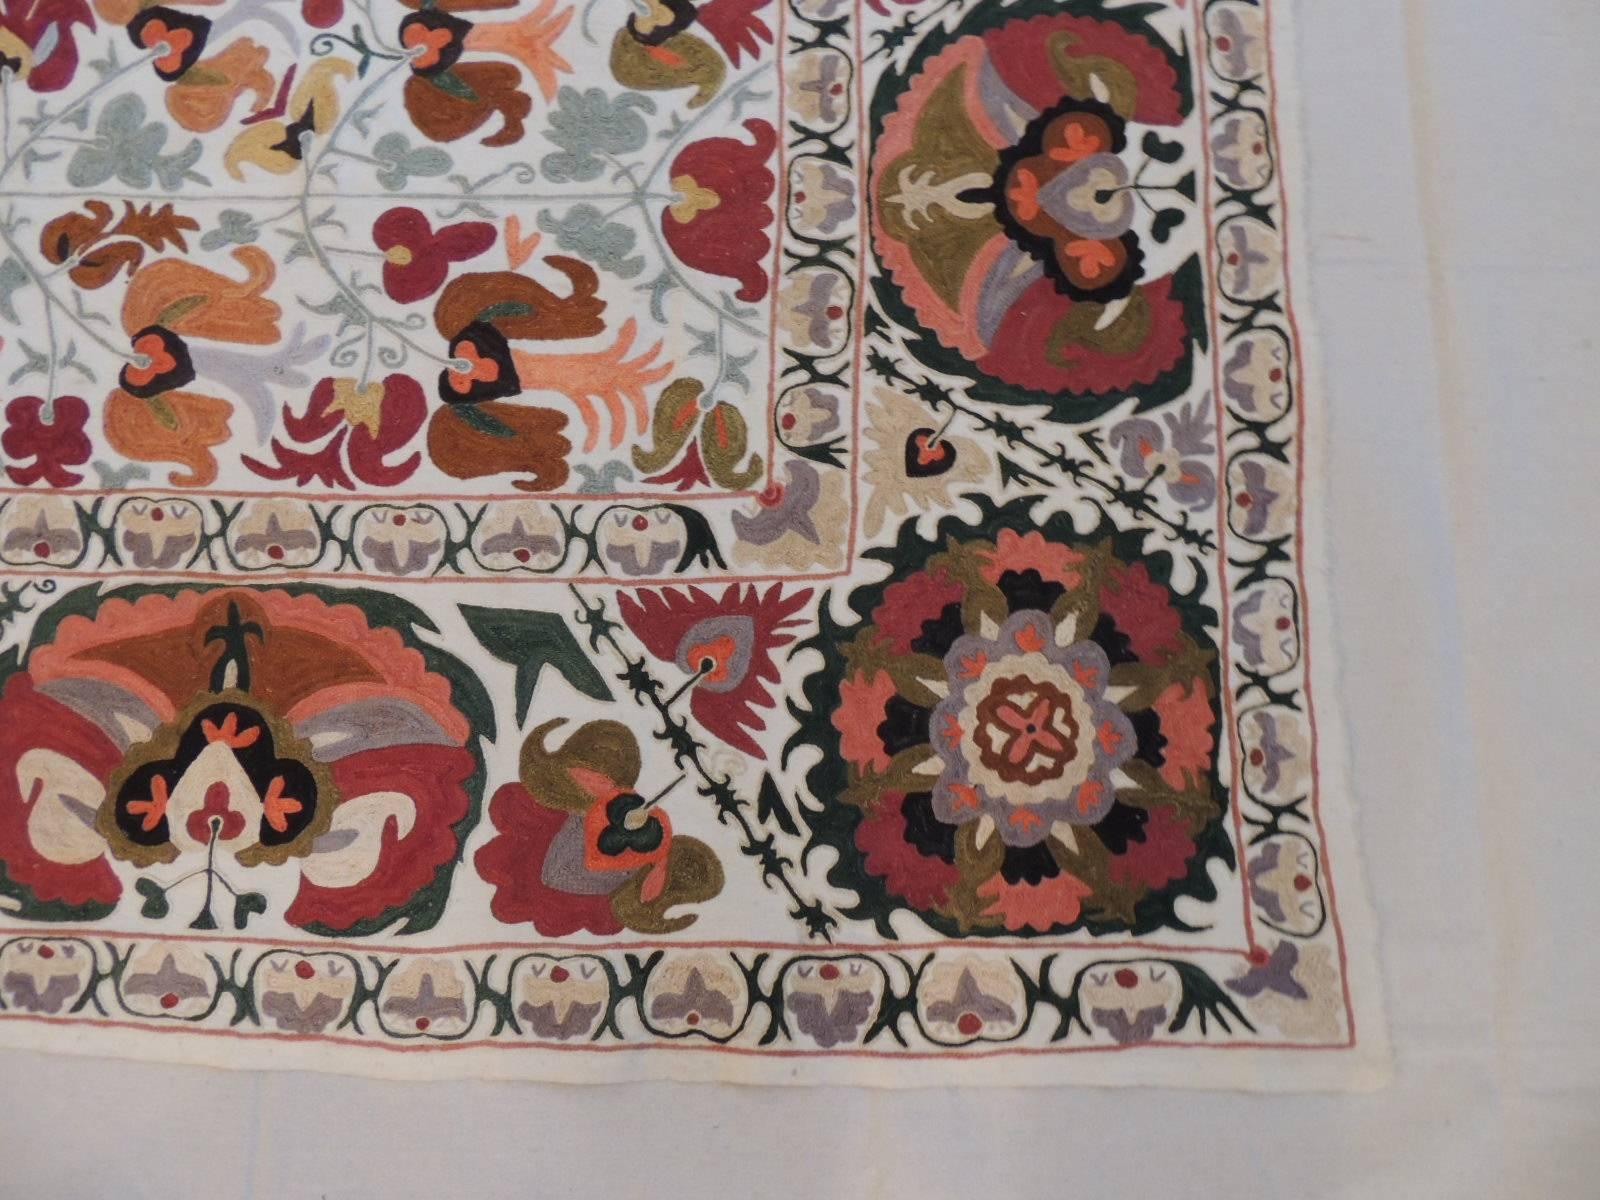 Offered by the Antique Textiles Galleries:
Vintage Uzbekistan embroidery Suzani textile panel. A needle work one-of-a-kind colorful traditional Uzbek Suzani floral textile. In shades of orange, red, green, beige and yellow with a border all around.